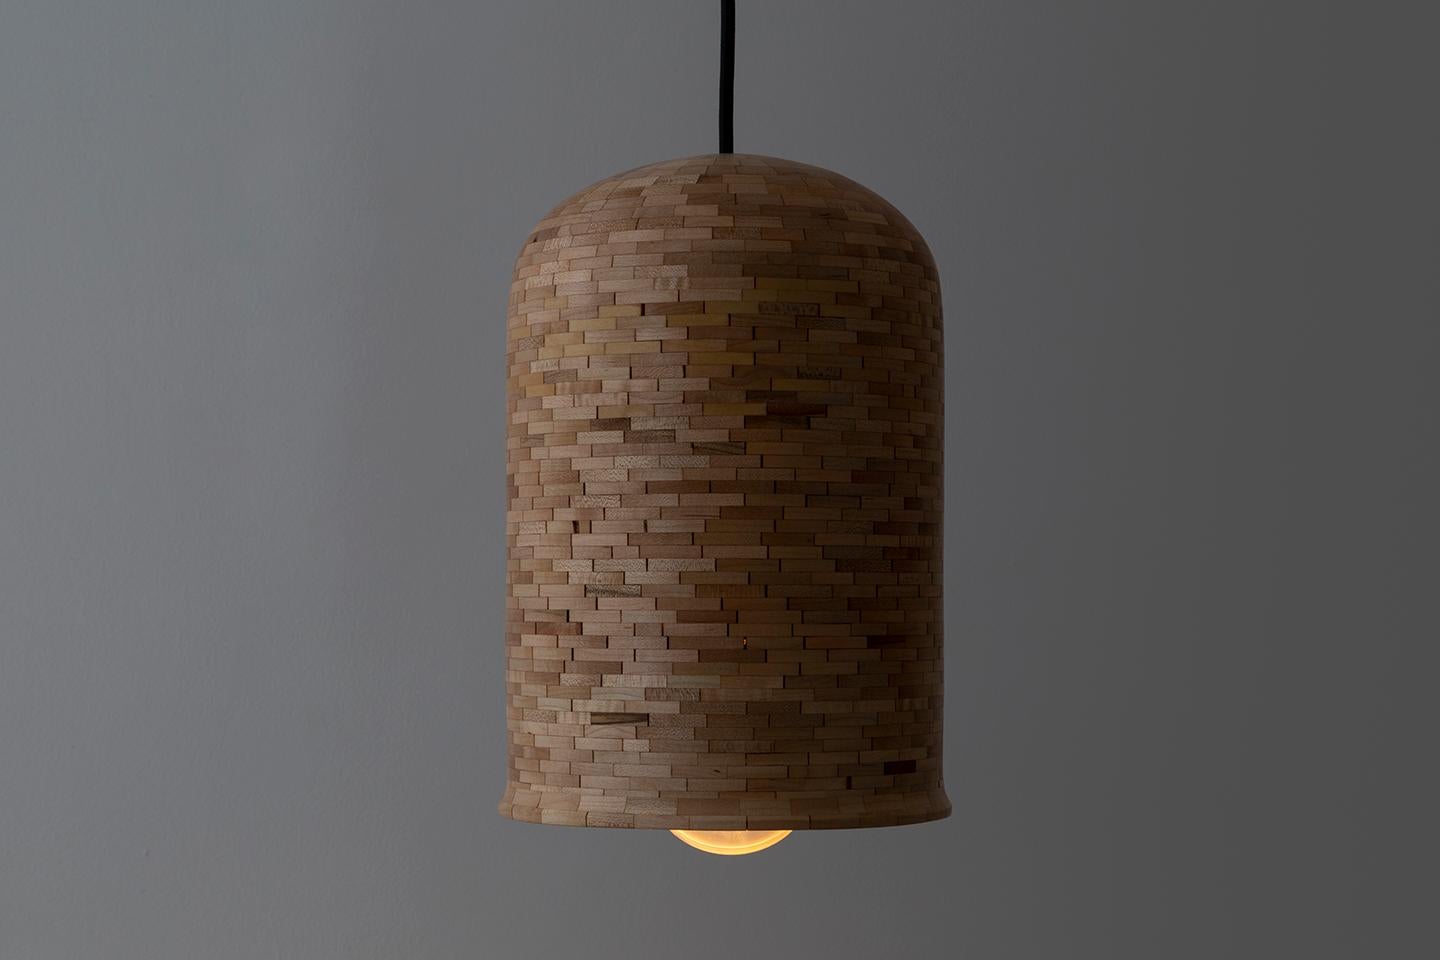 The STACKED cylindrical bell-shaped Illuminated Hanging Sculpture shown here is made of salvaged Maple. All Illuminated Sculptures are hand-built custom per your specifications. Larger or smaller, used individually or as a grouping, a different